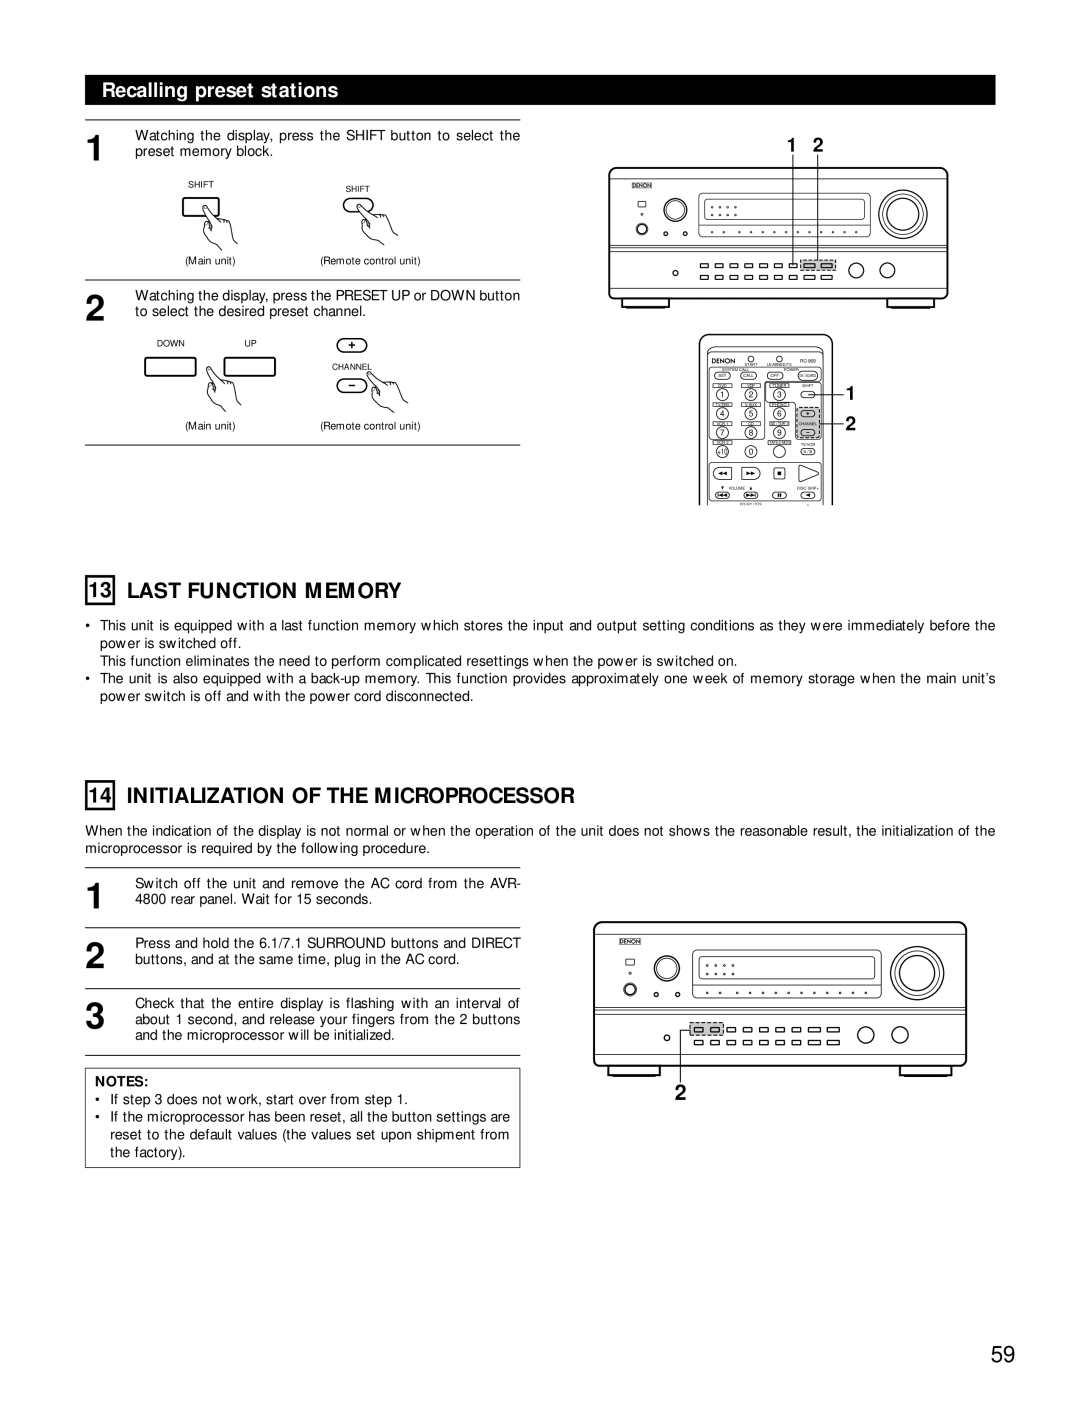 Denon AVR-4800 manual 13LAST FUNCTION MEMORY, 14INITIALIZATION OF THE MICROPROCESSOR, Recalling preset stations, Notes 